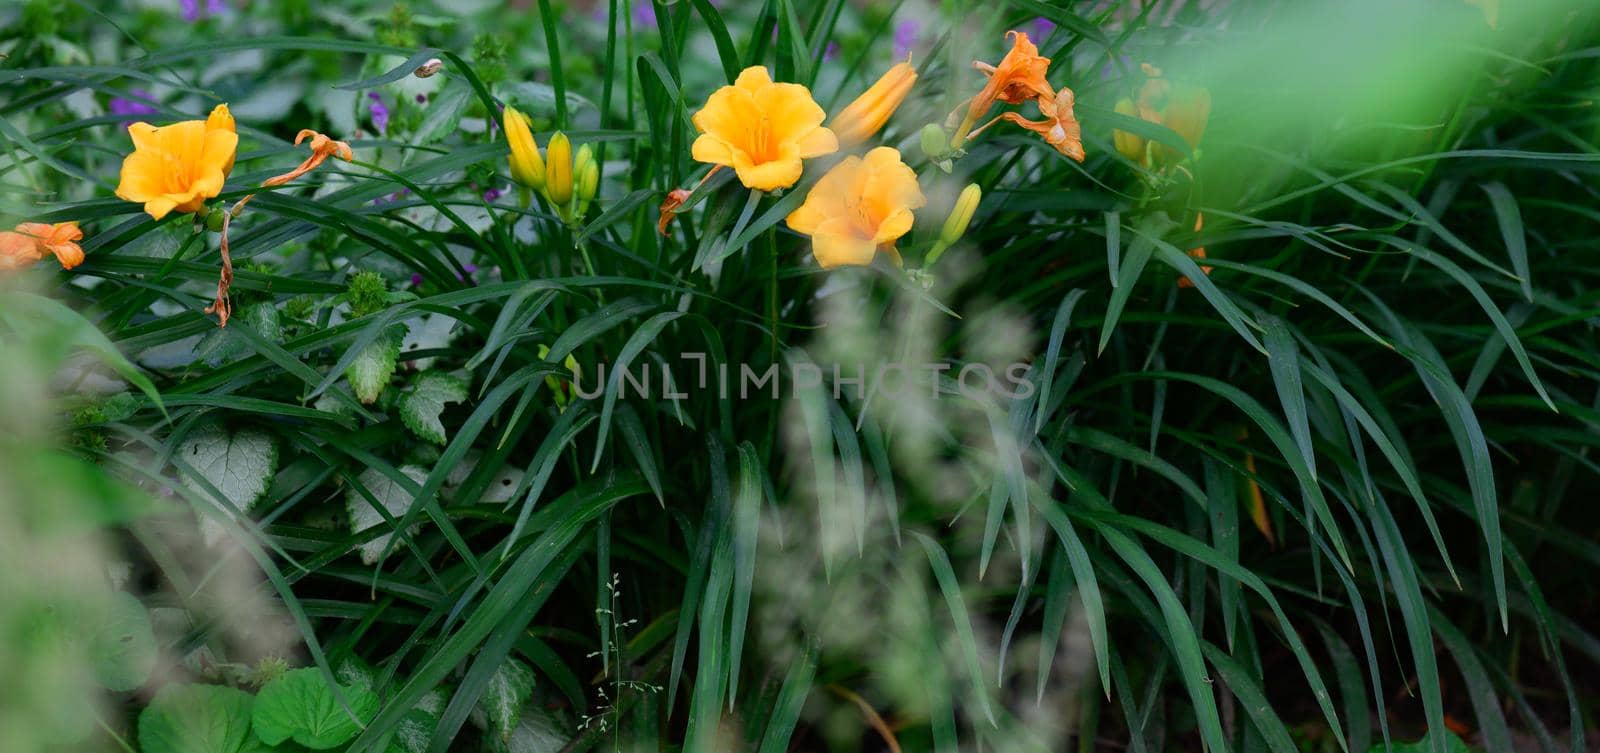 blooming yellow lilies with green stems and leaves in the garden, summer day, banner